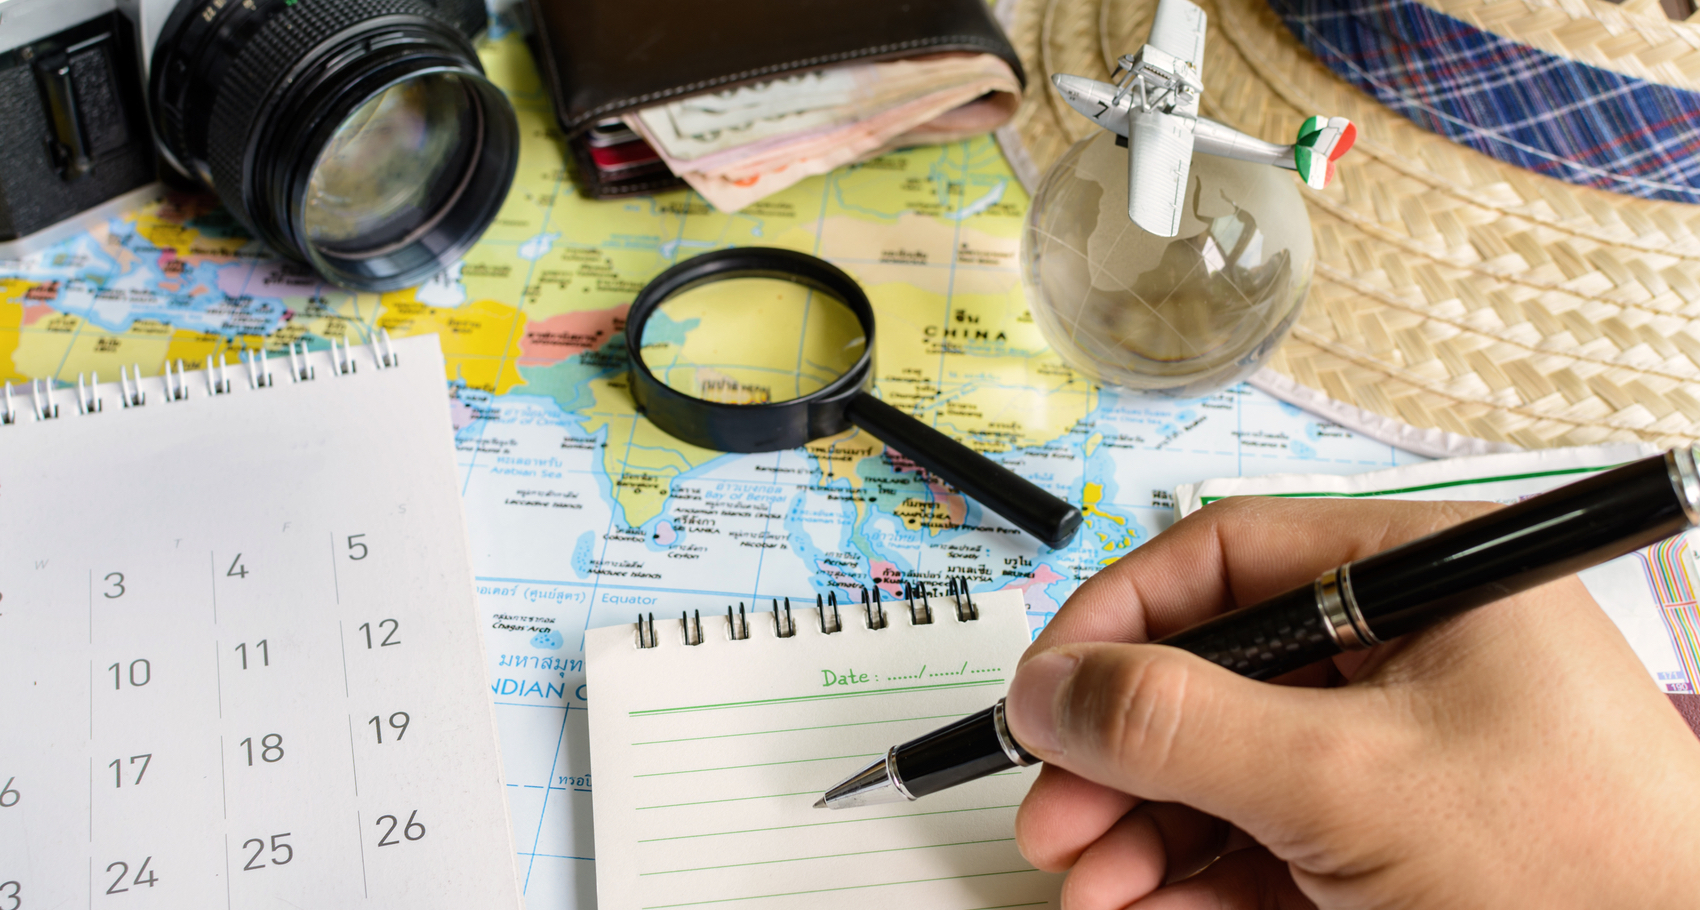 Tips to ChooTips to Choose the Right Tour Plannerse the Right Tour Planner